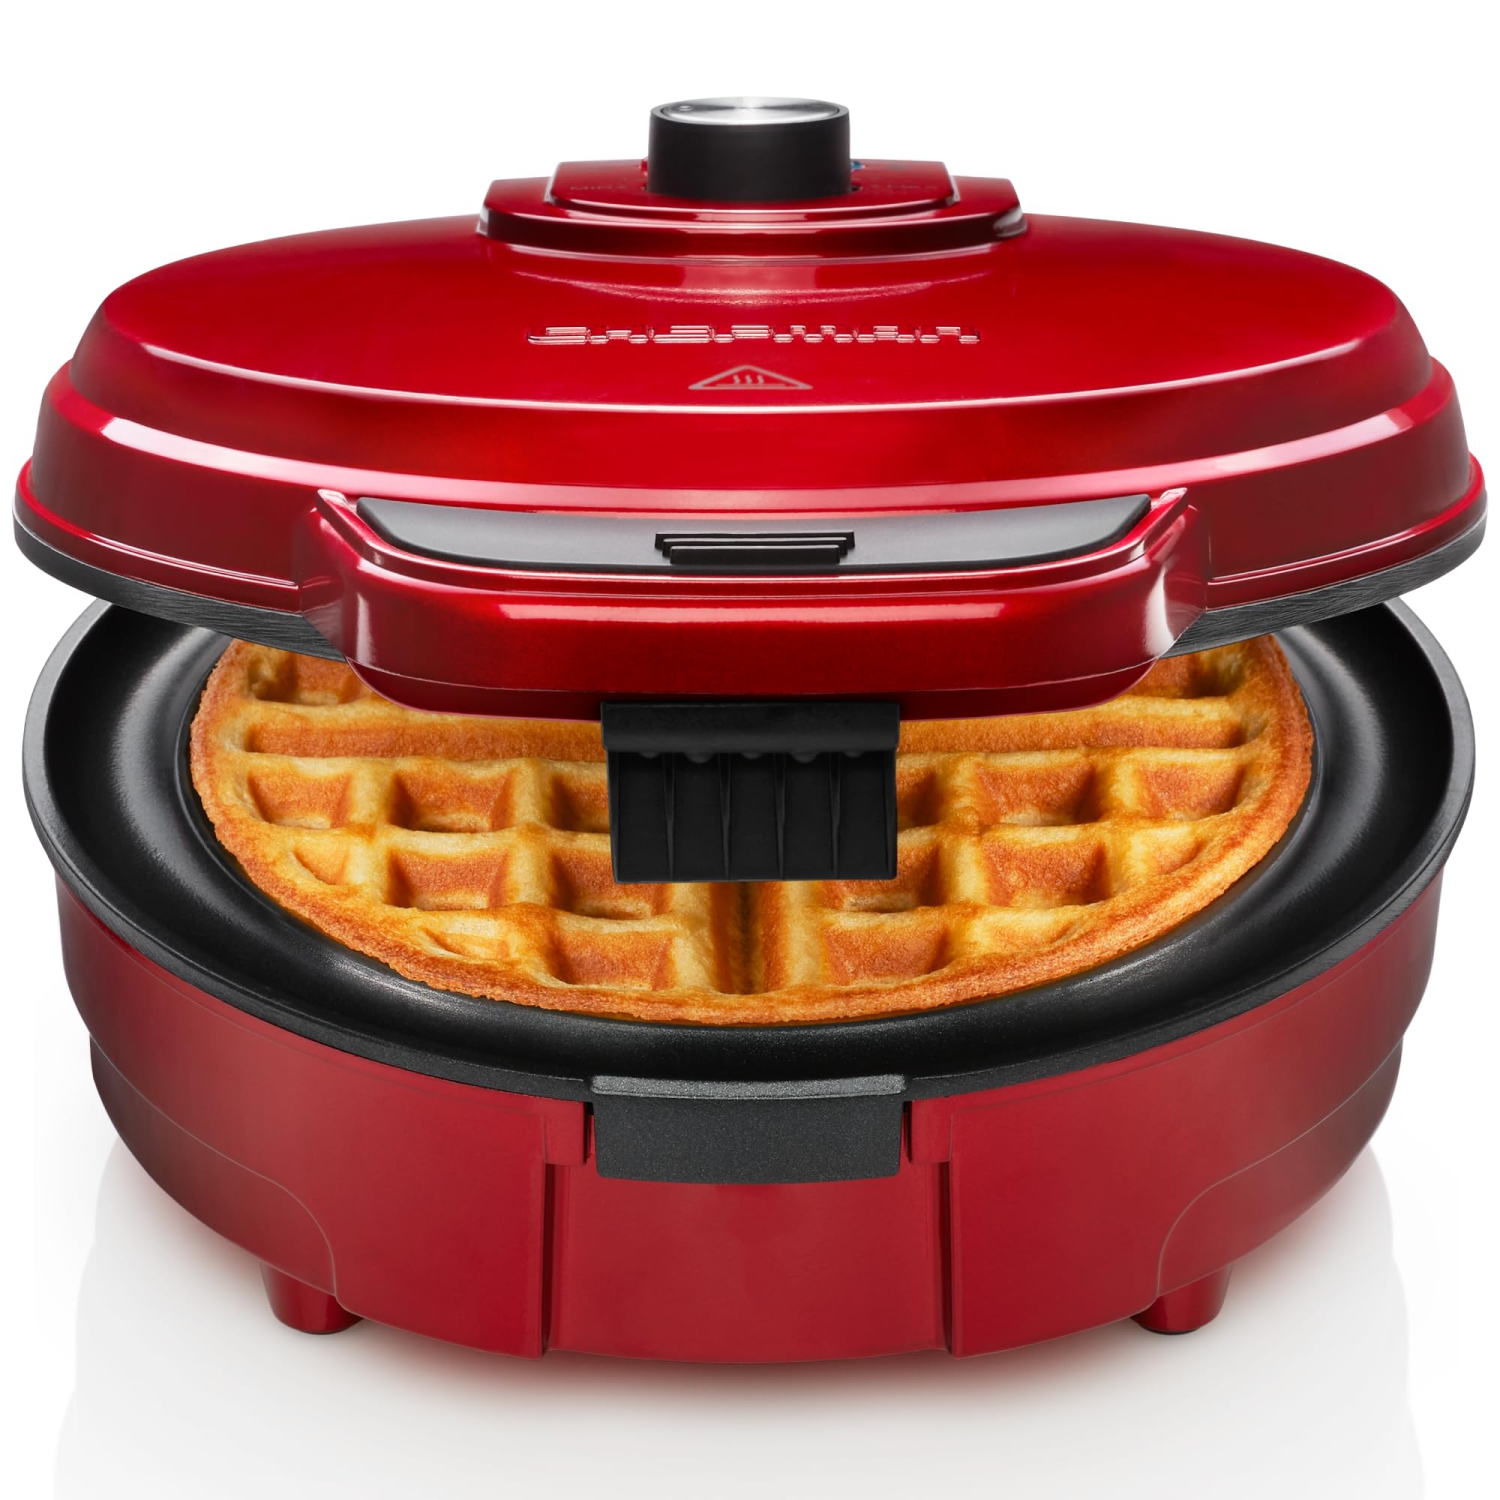 Chefman Anti-Overflow Belgian Waffle Maker w/ Shade Selector, Temperature Control, Mess Free Moat, Red